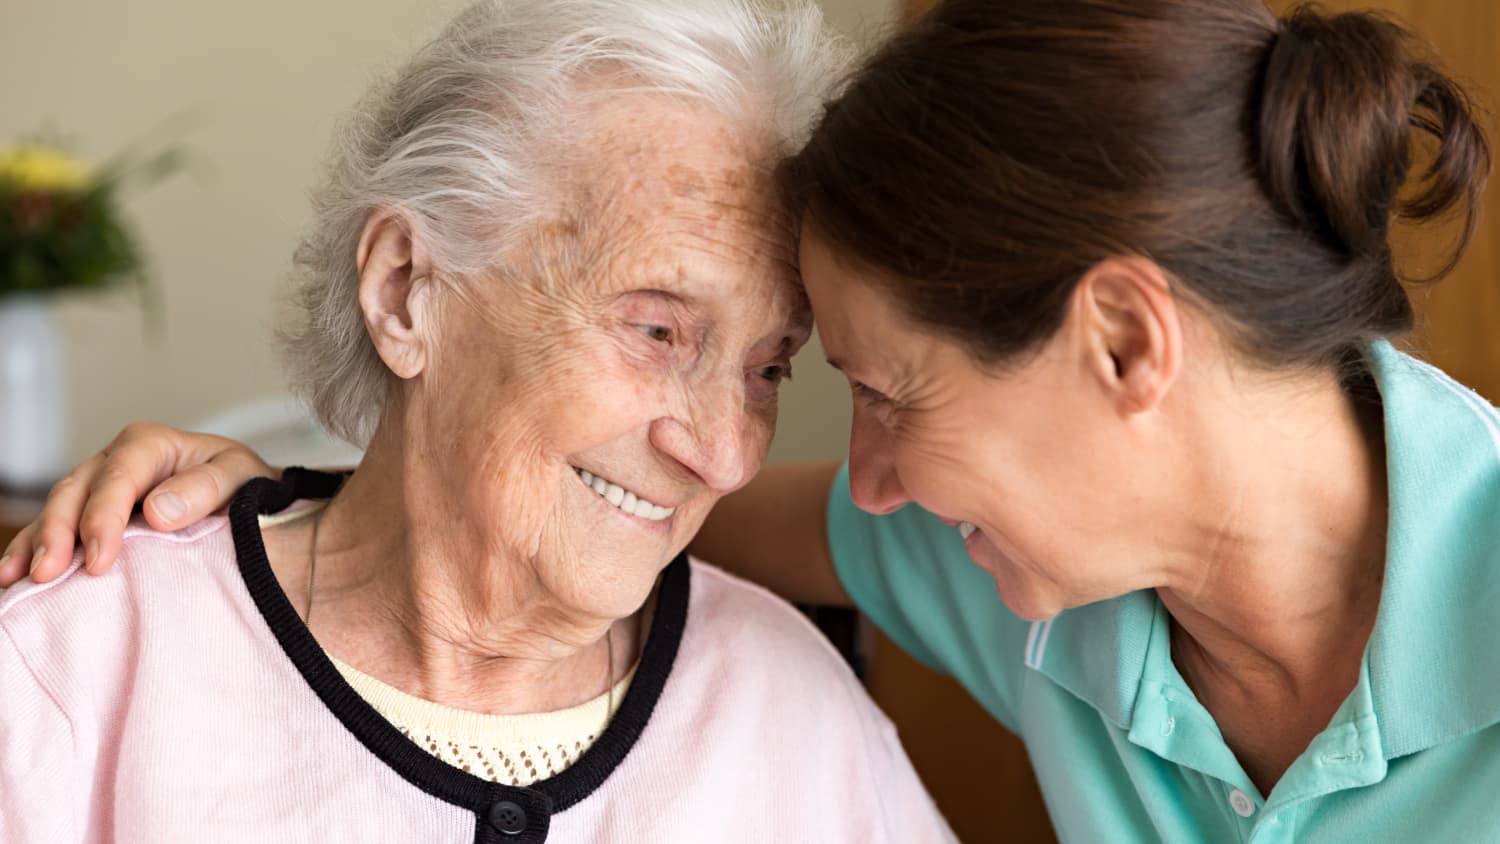 Tips for Caregivers and Families of People With Dementia